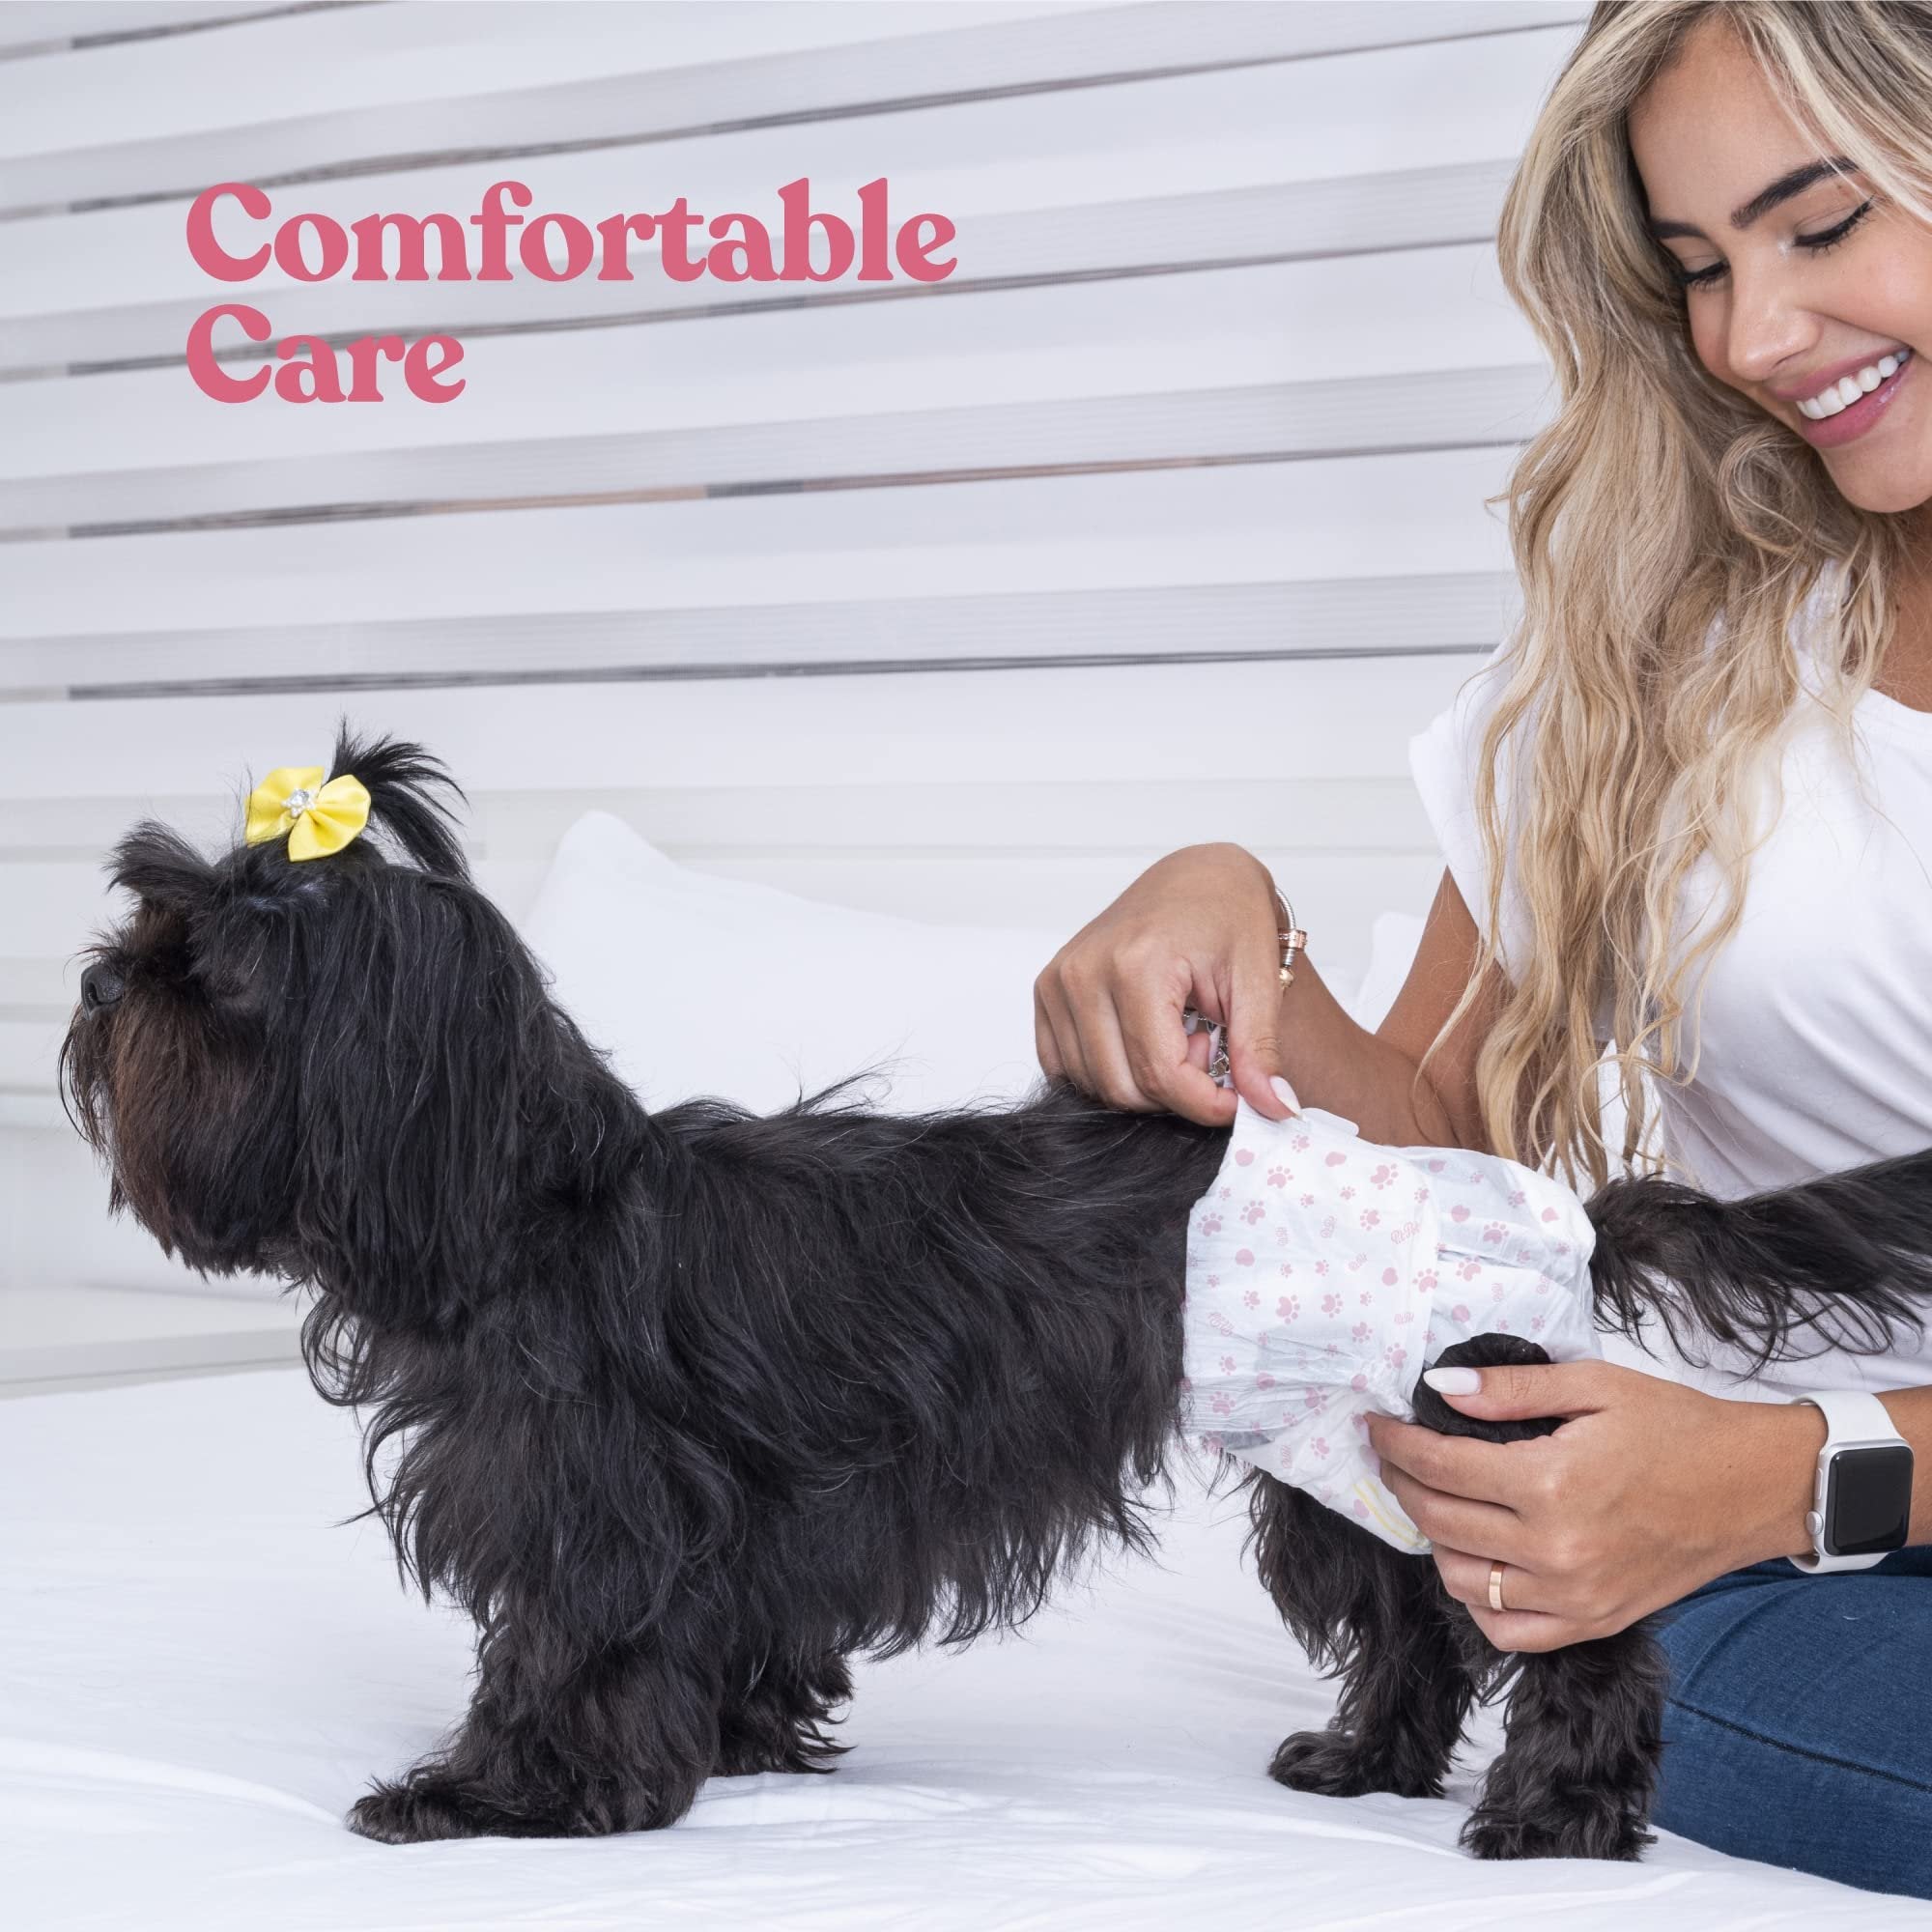 Comfortable Female Dog Diapers - 30-Pack Super Absorbent Disposable Doggie Diapers - FlashDry Gel Technology & Wetness Indicator - Leakproof Diapers for Dogs in Heat, Excitable Urination, Incontinence